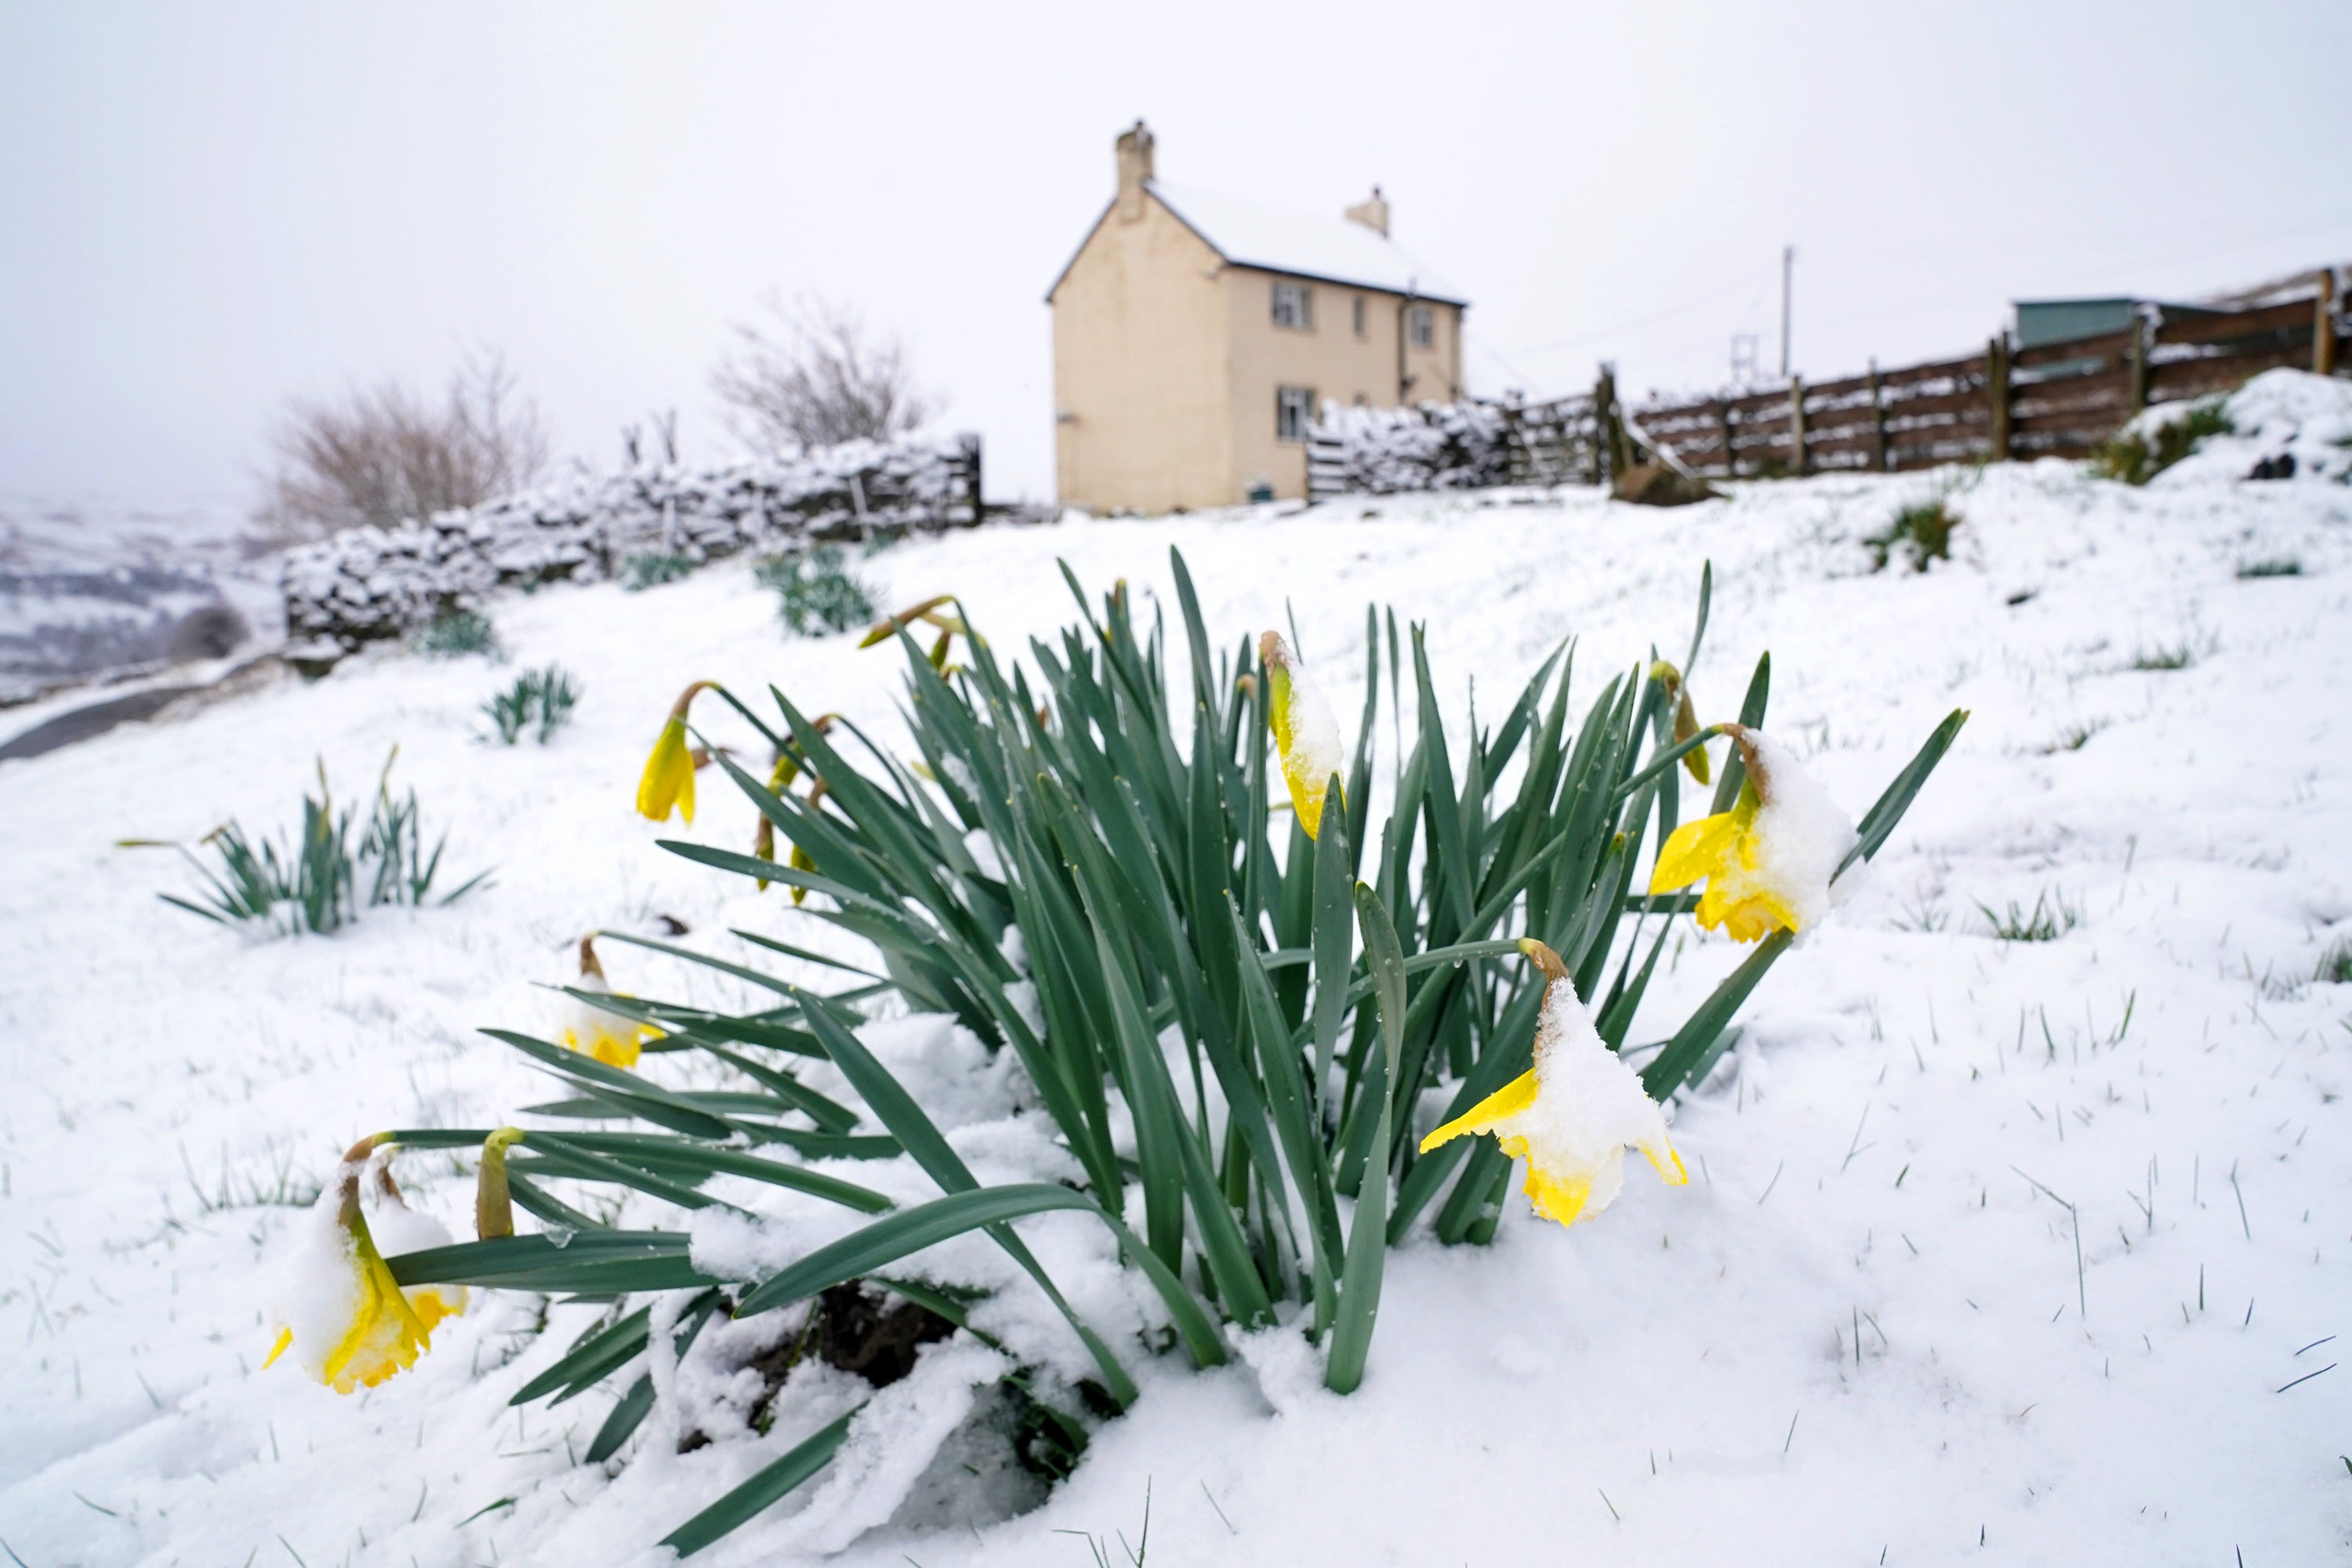 Daffodils bloom in the snow near Stanhope, Northumberland